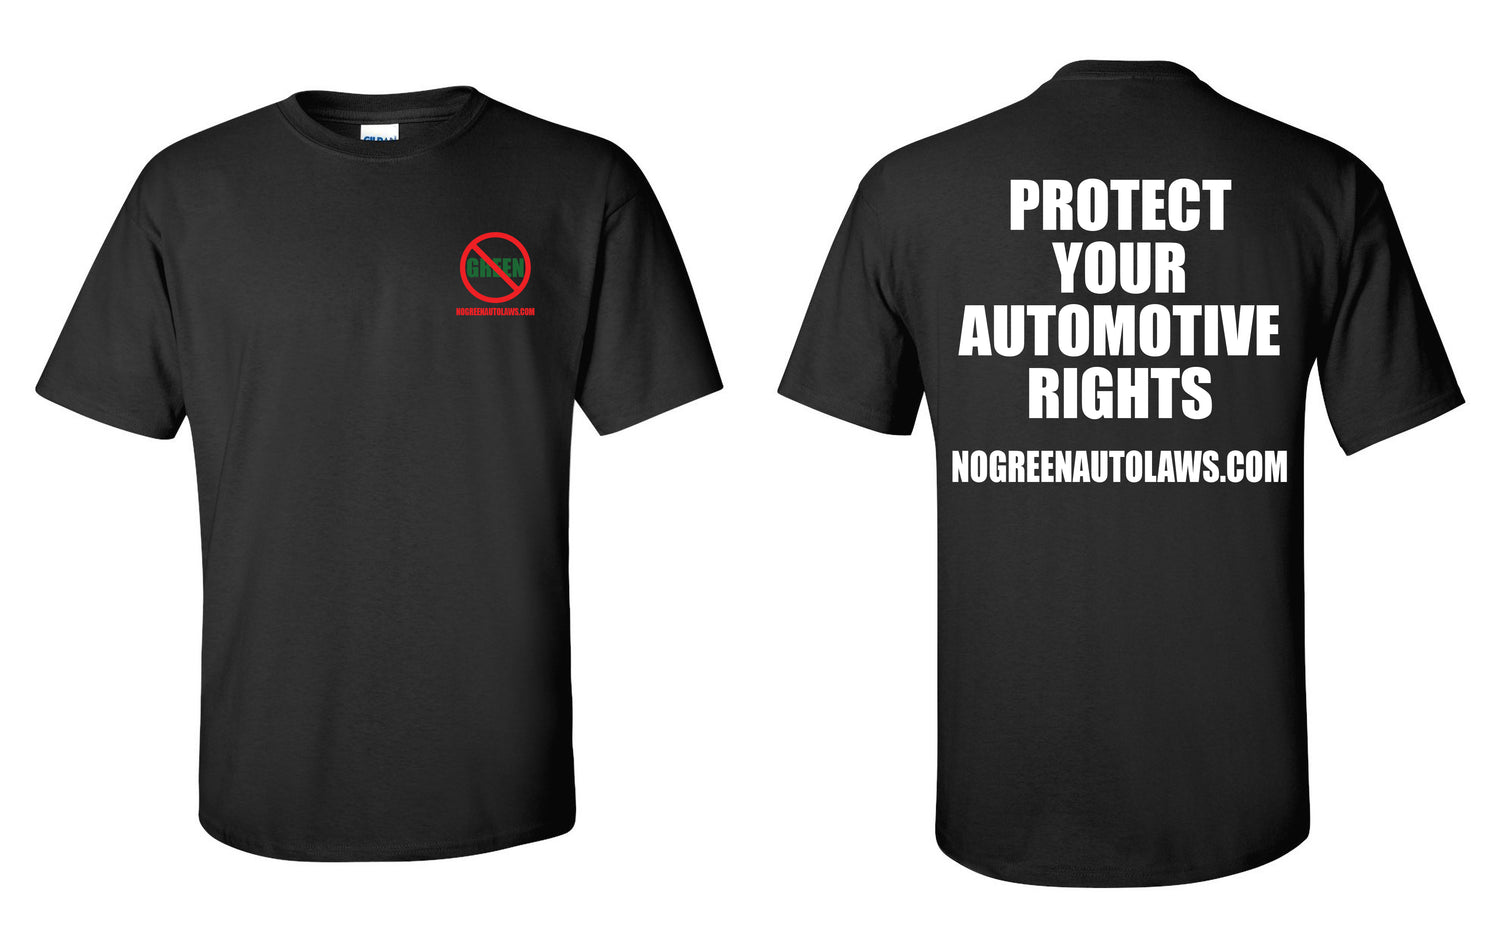 GET ALL PROTECT YOUR AUTOMOTIVE RIGHTS MERCHANDISE HERE!